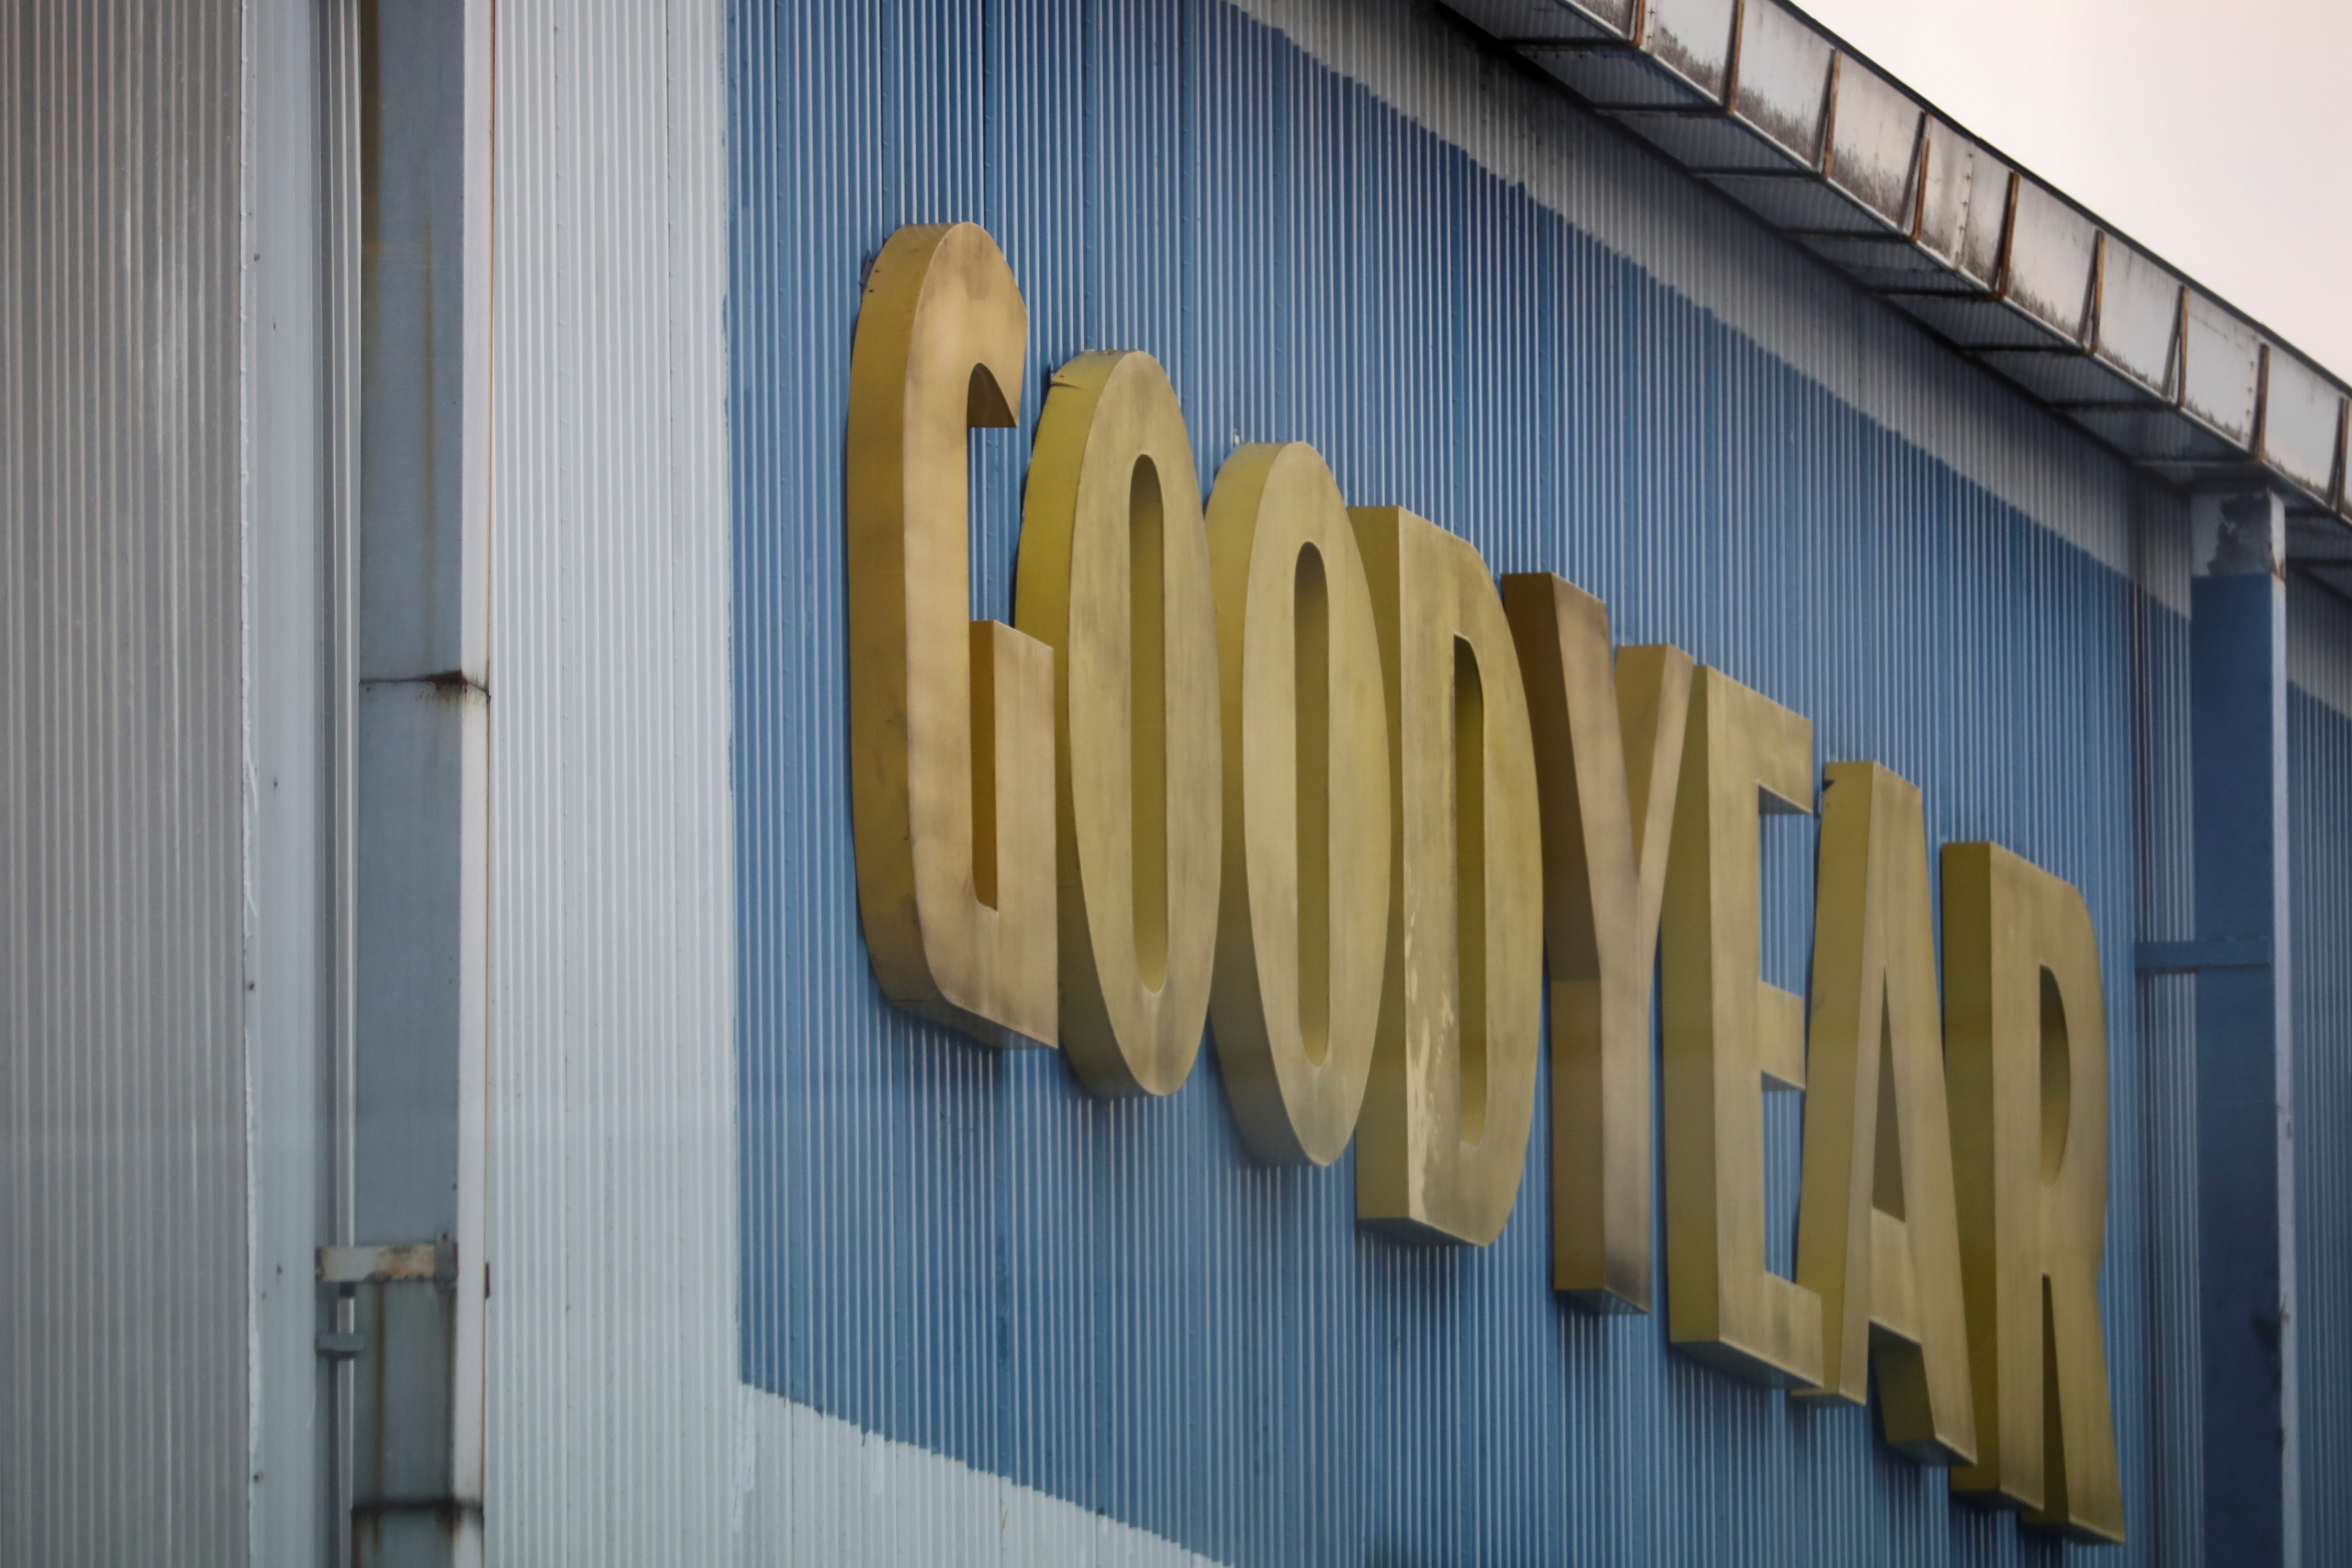 U.S. tyre maker Goodyear faces allegations of labour abuse in 